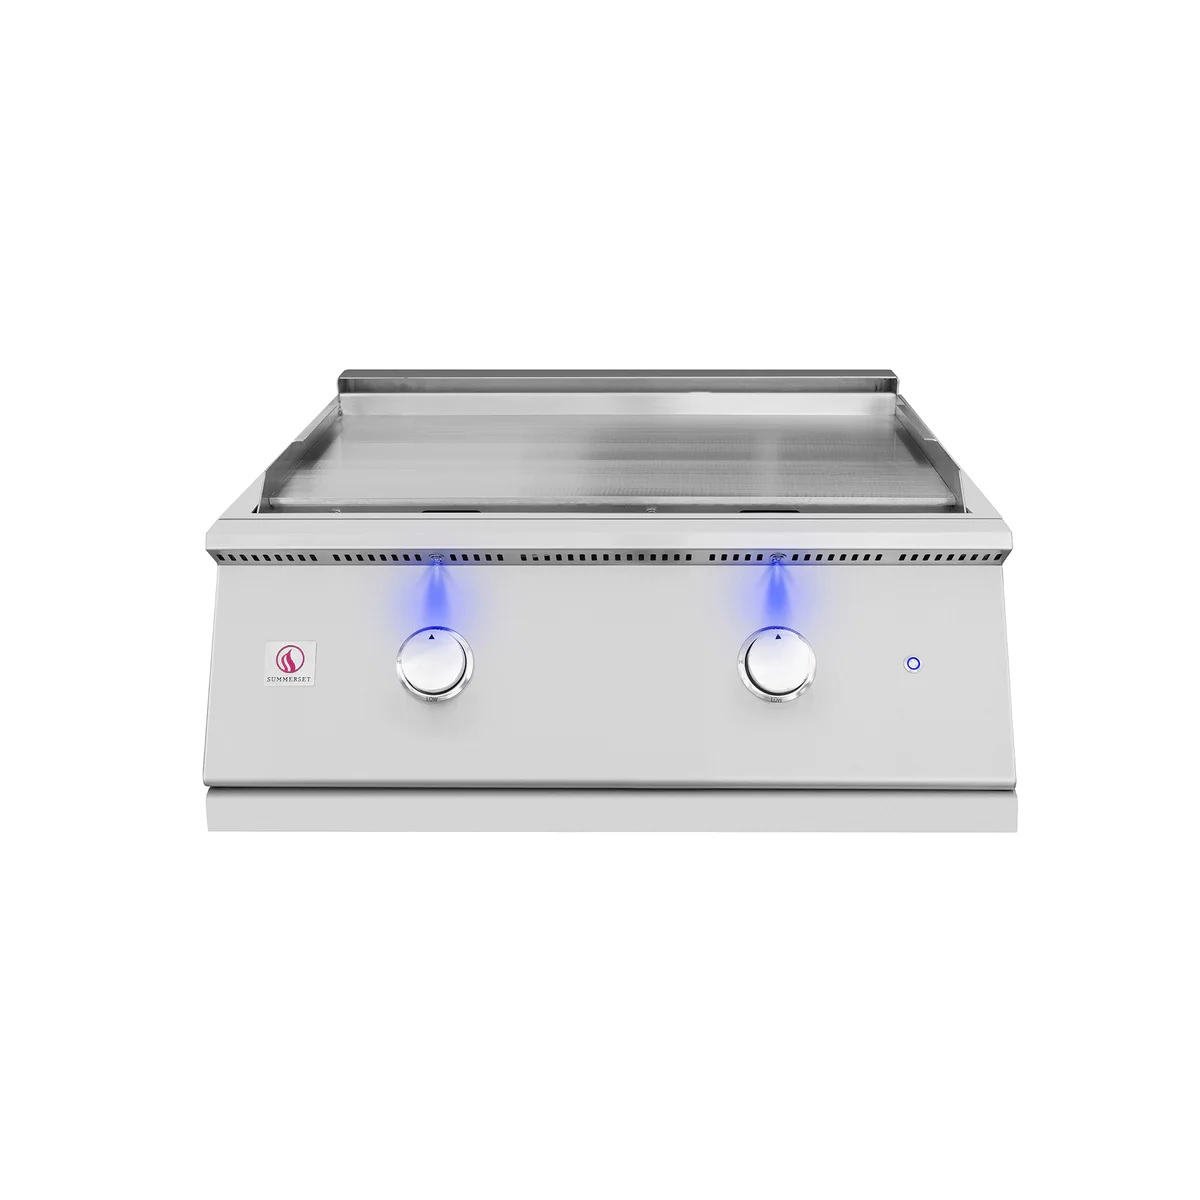 30 inch gas griddle product image